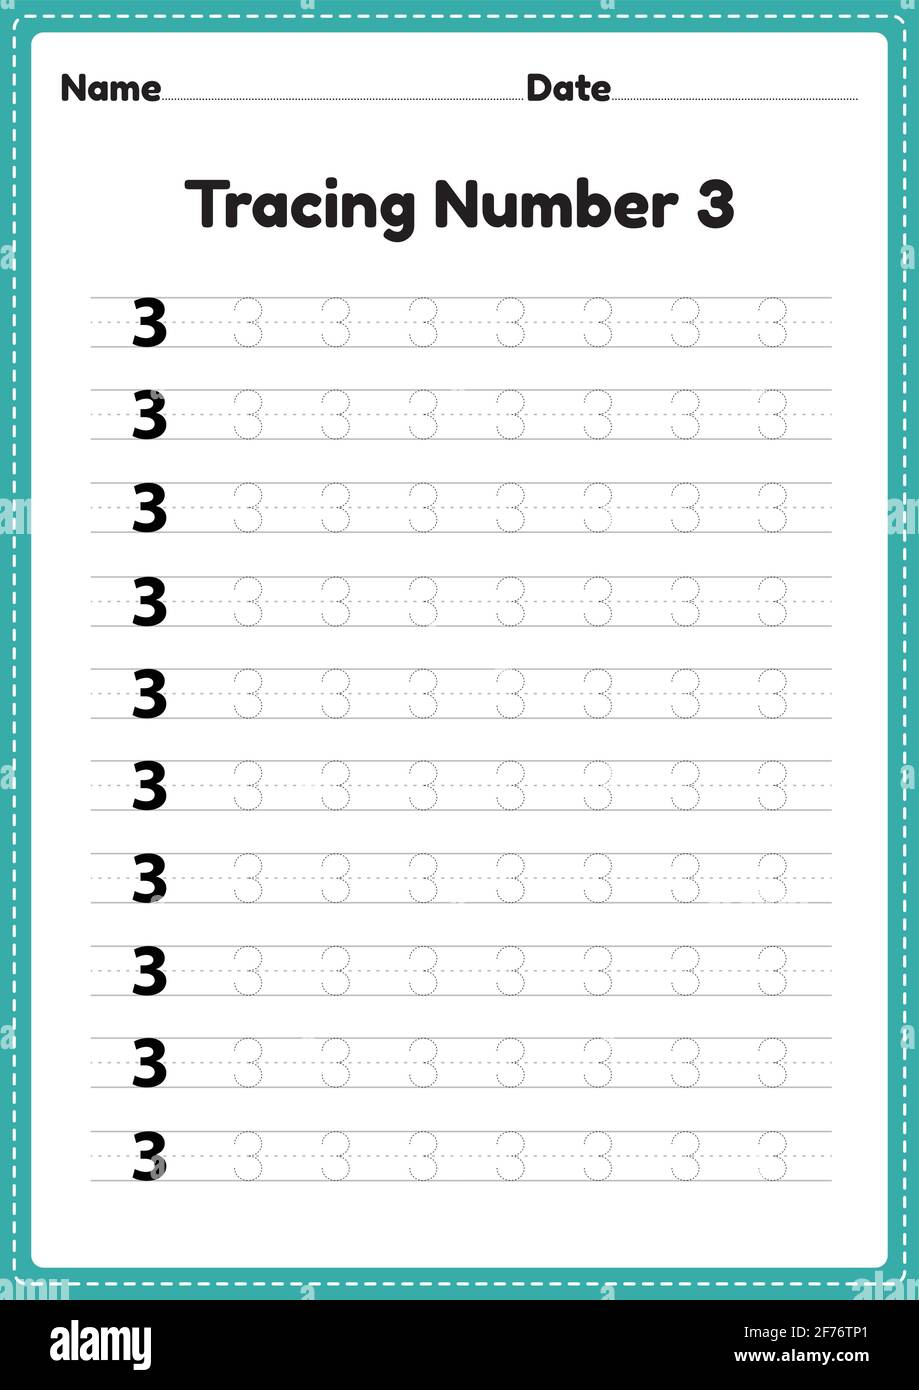 Tracing number 3 worksheet for kindergarten and preschool kids for educational handwriting practice in a printable page. Stock Vector